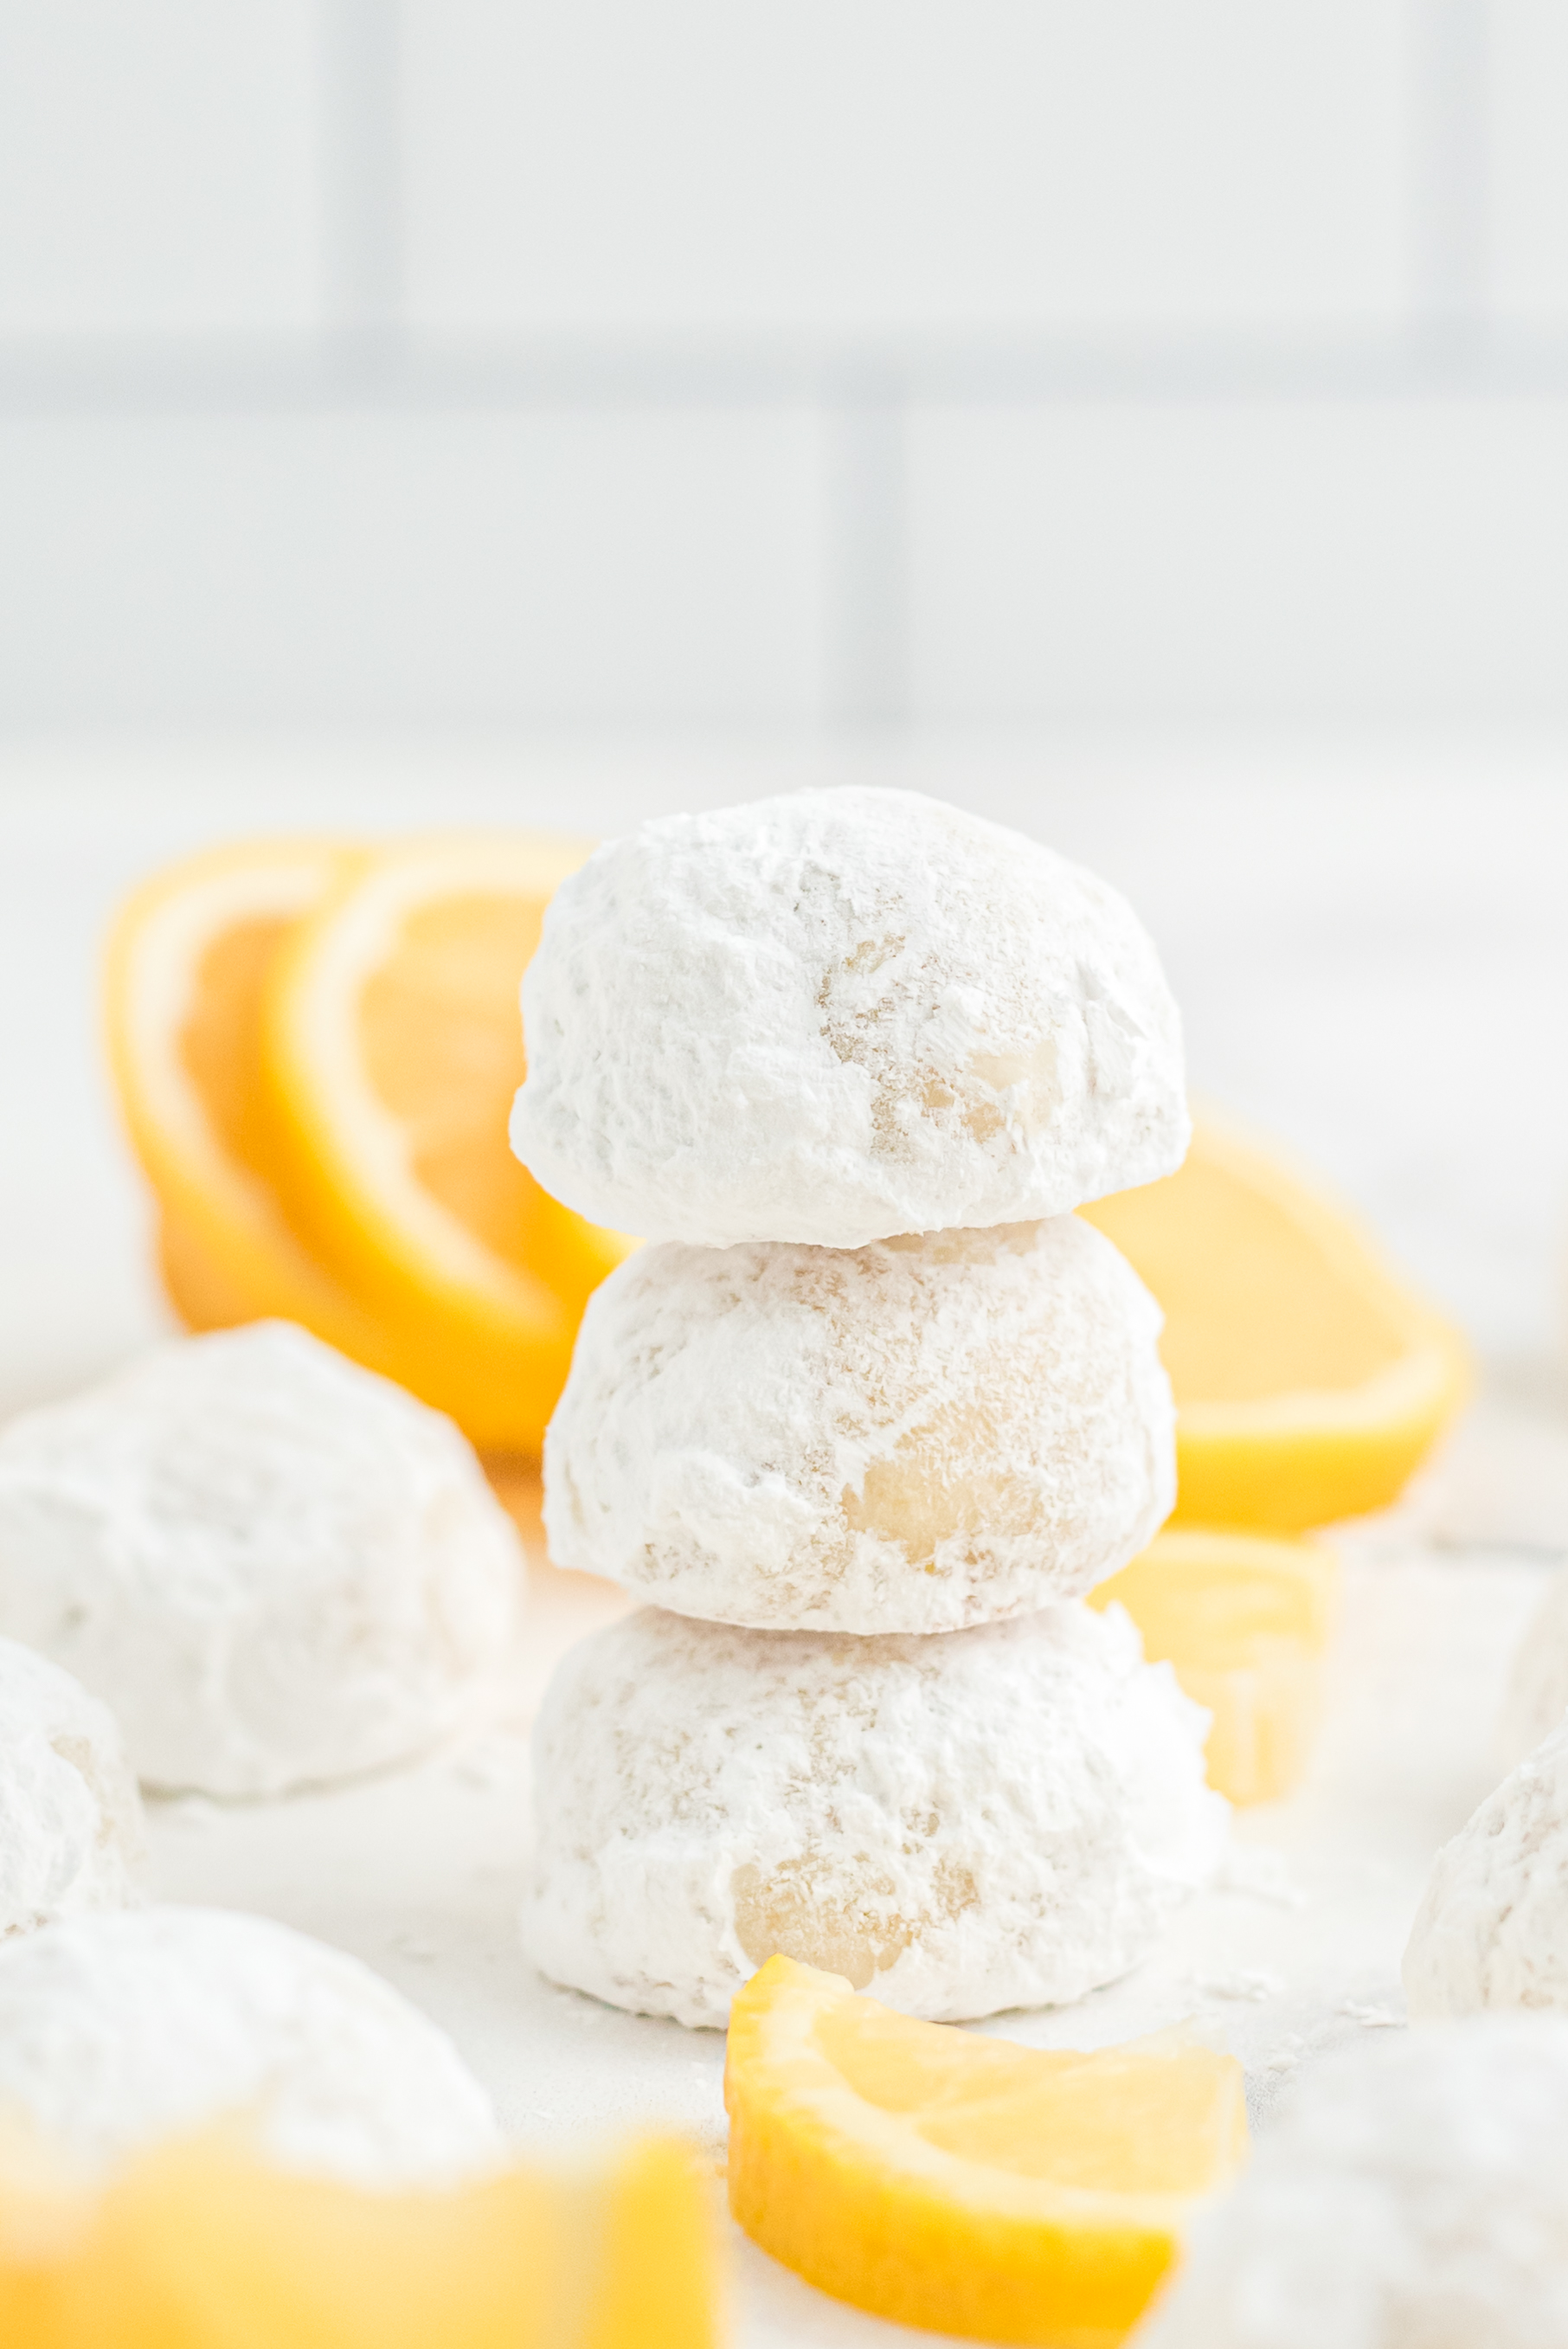 Lemon Coolers are delightful lemon flavored cookies that are small, round, and covered with powdered sugar. They are perfectly bite-sized which is great for snacking, and they go so well with coffee on your coffee break. Try them this summer for a fresh and zesty treat the whole family will love!

